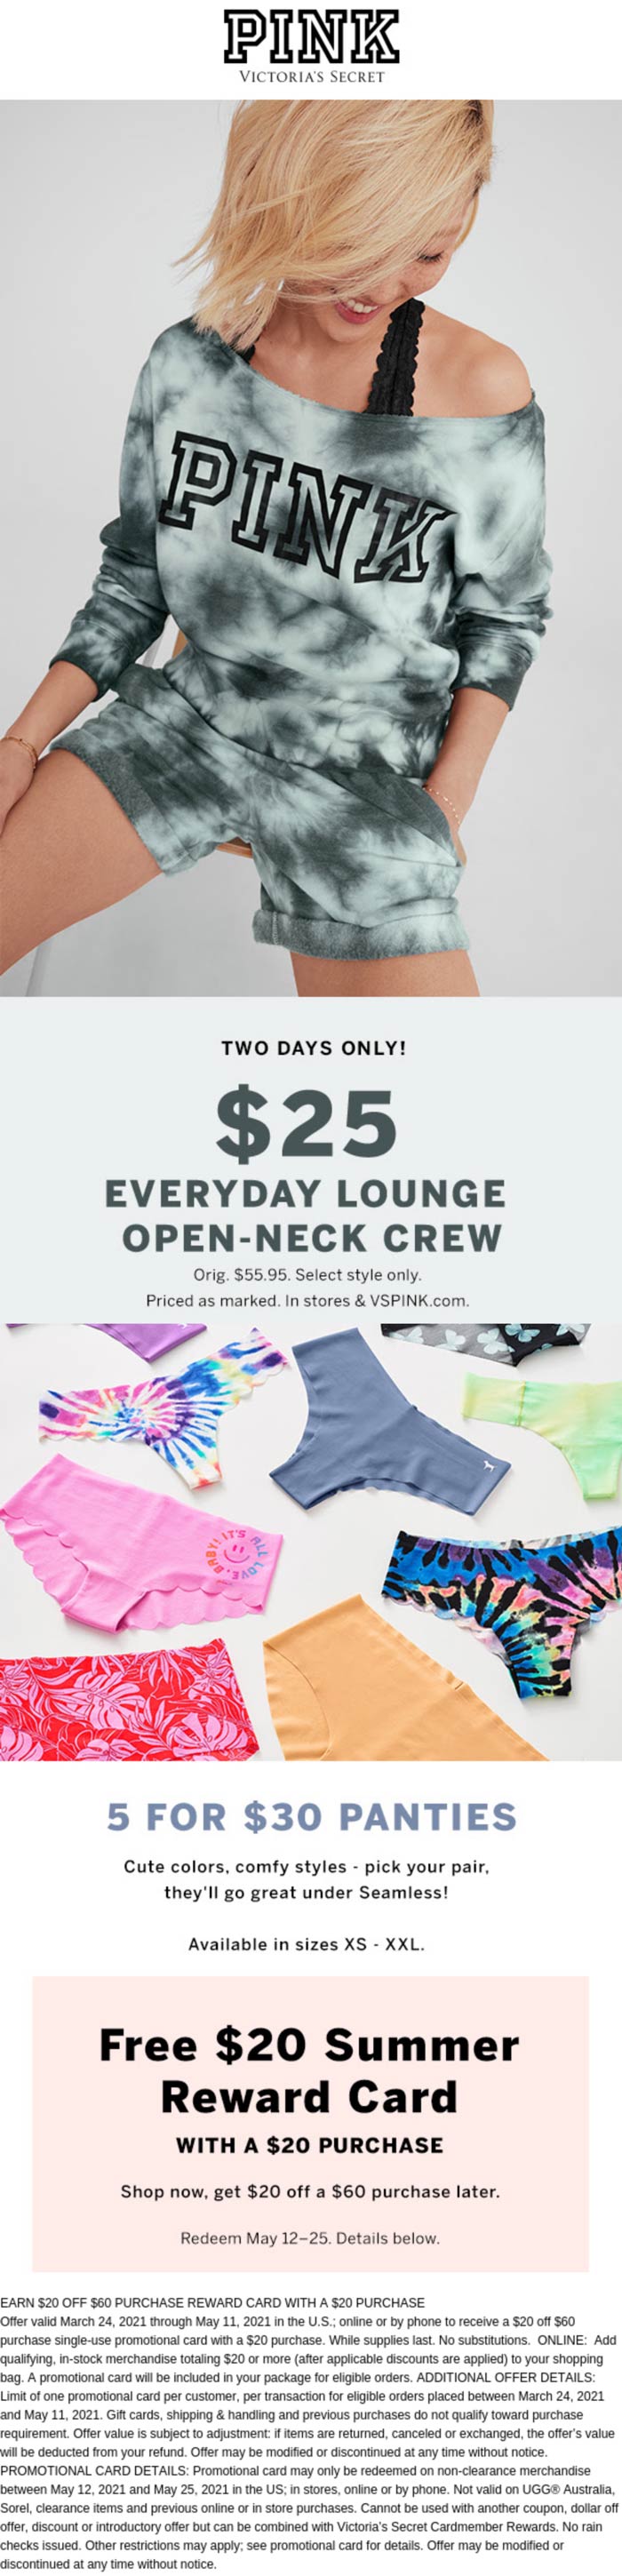 PINK stores Coupon  $25 crew + free $20 store card with $20 spent at Victorias Secret PINK, ditto online #pink 